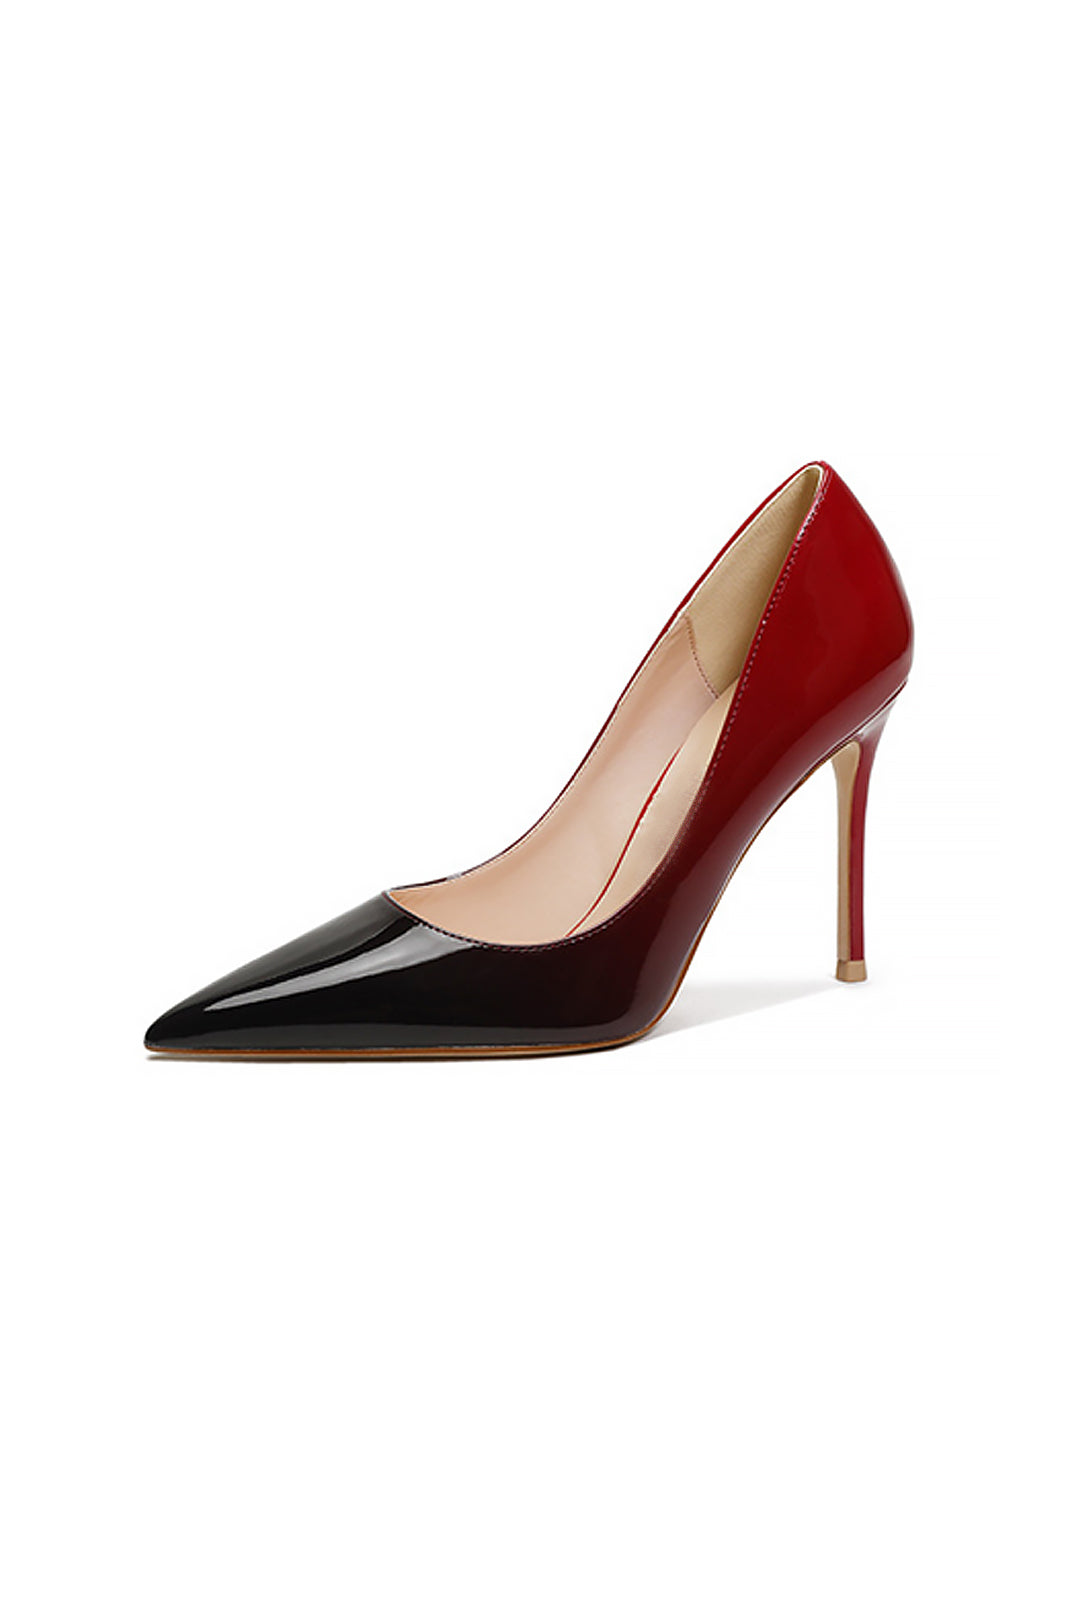 Gradient Patent Leather Pointed-toe High Heels